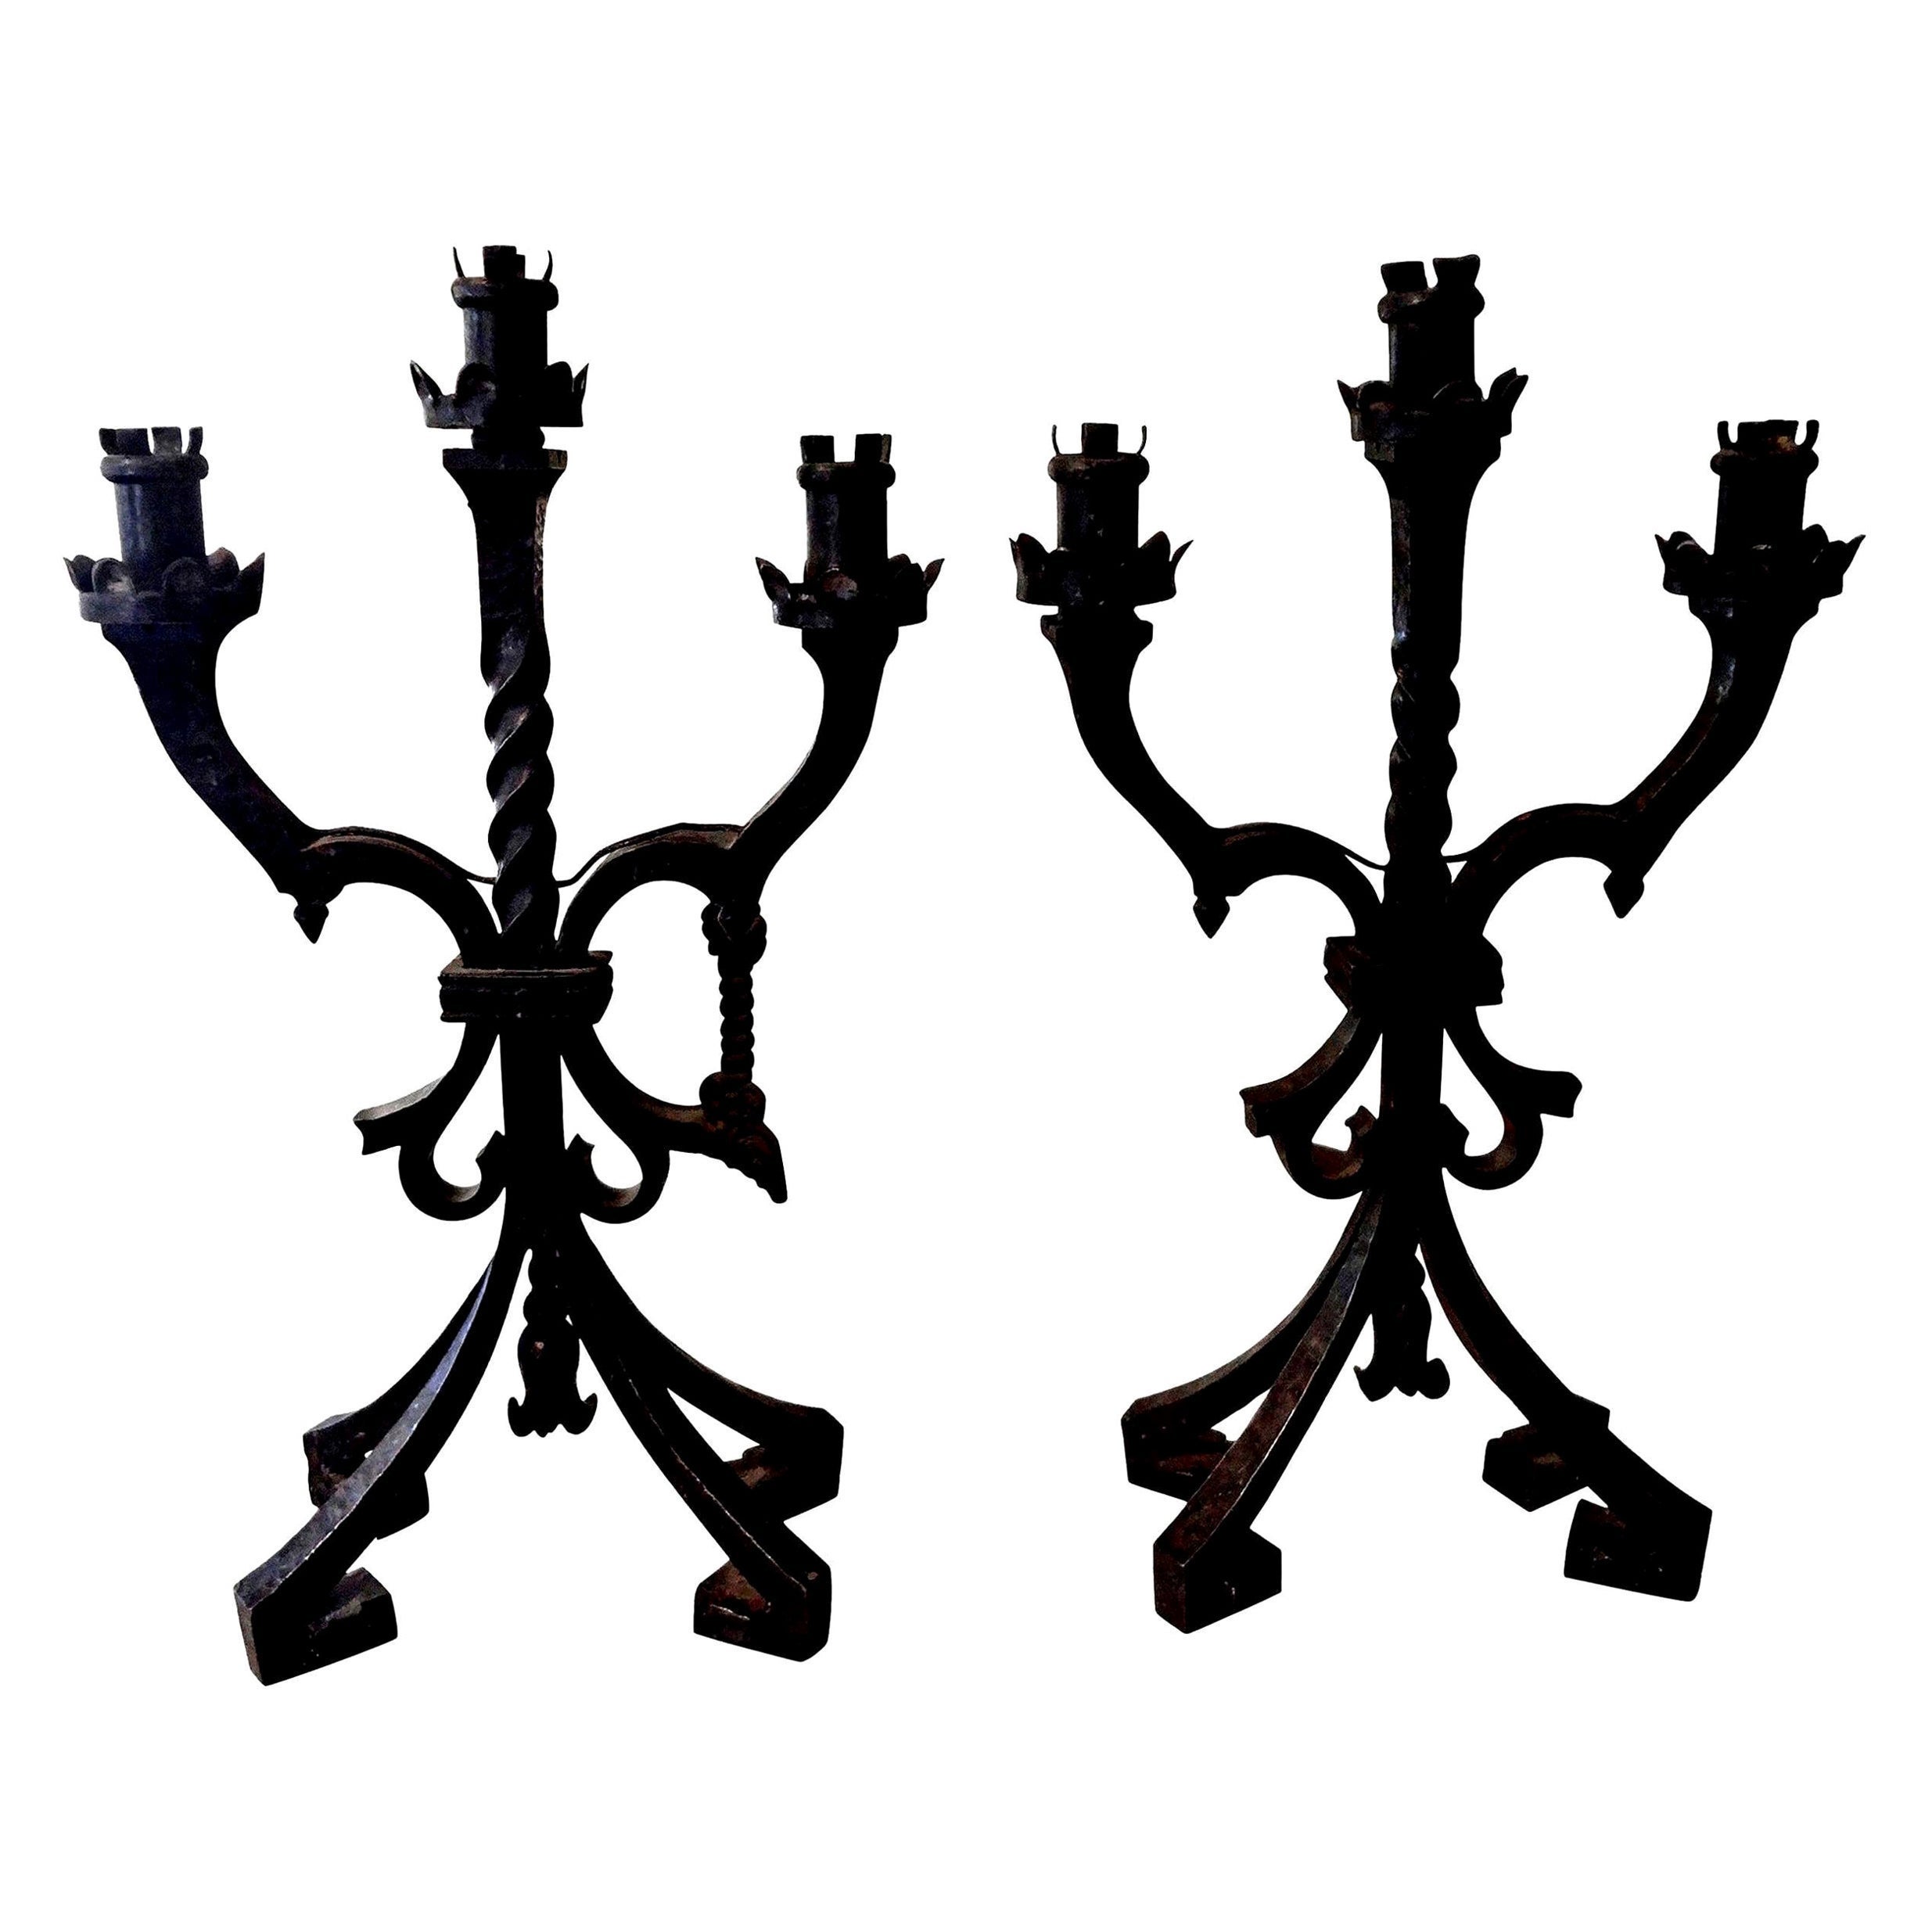 Pair of French Art Deco Iron Candleholders or Lamps Attributed to Charles Piguet